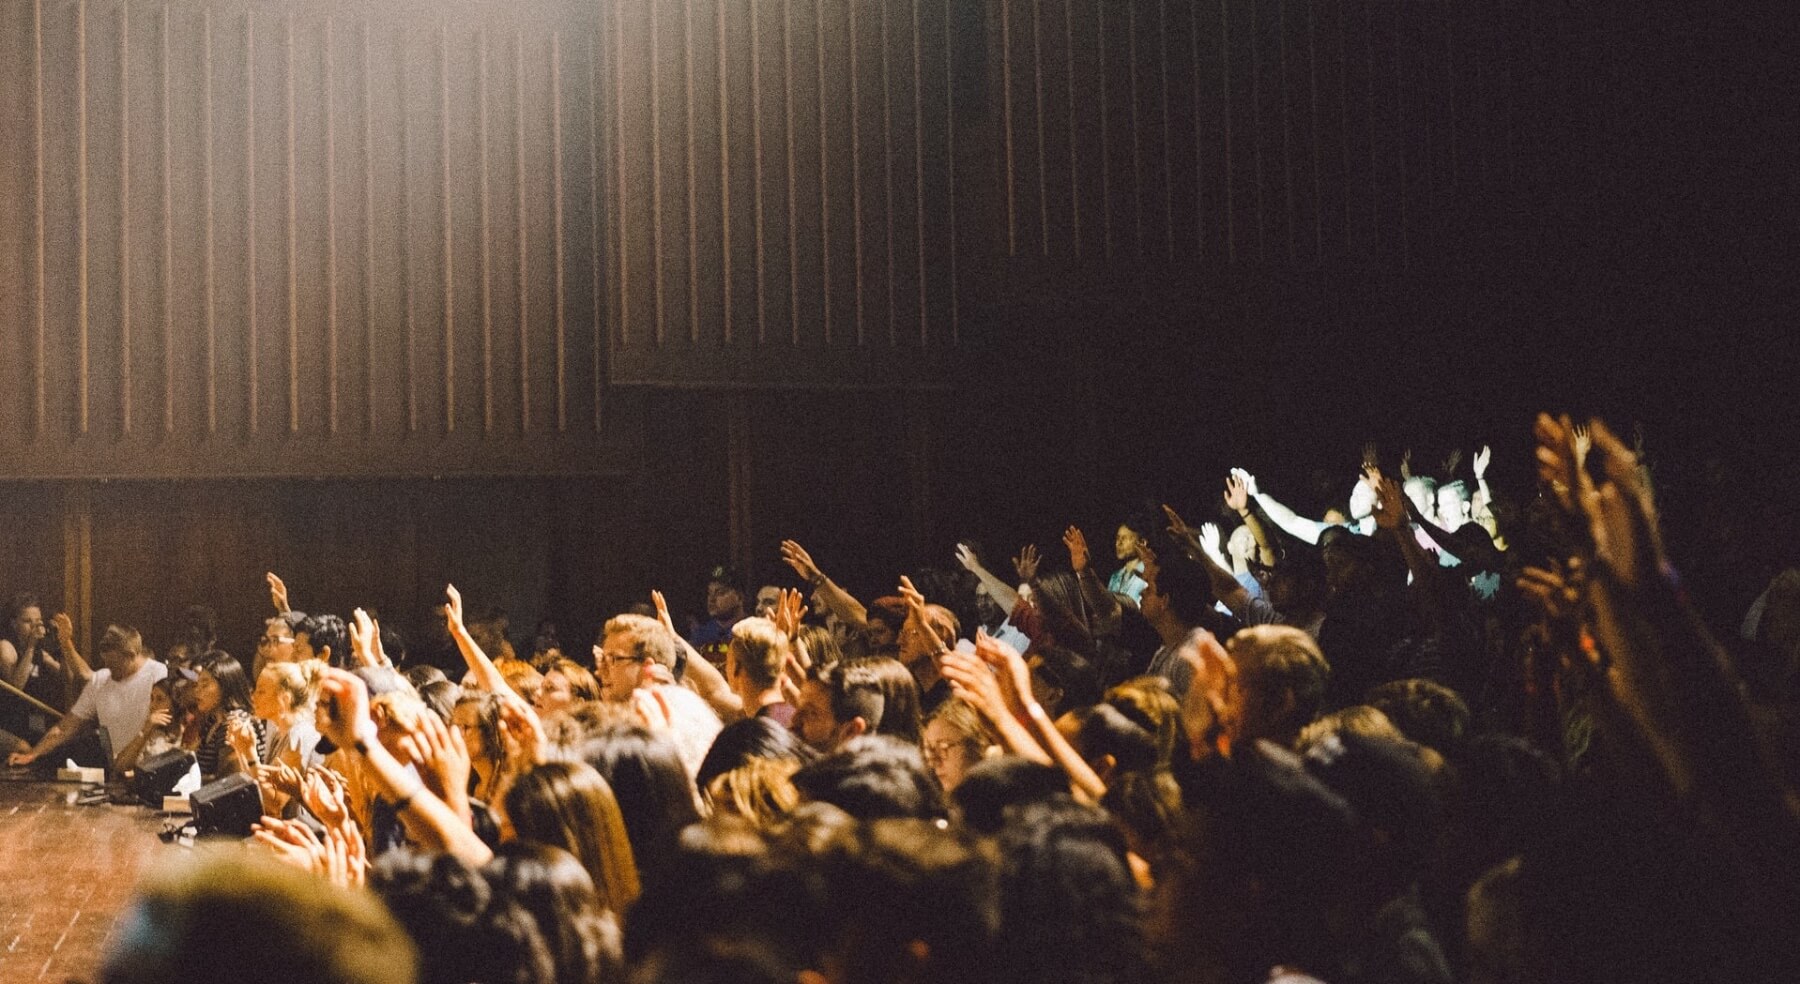 An audience raising arms for questions